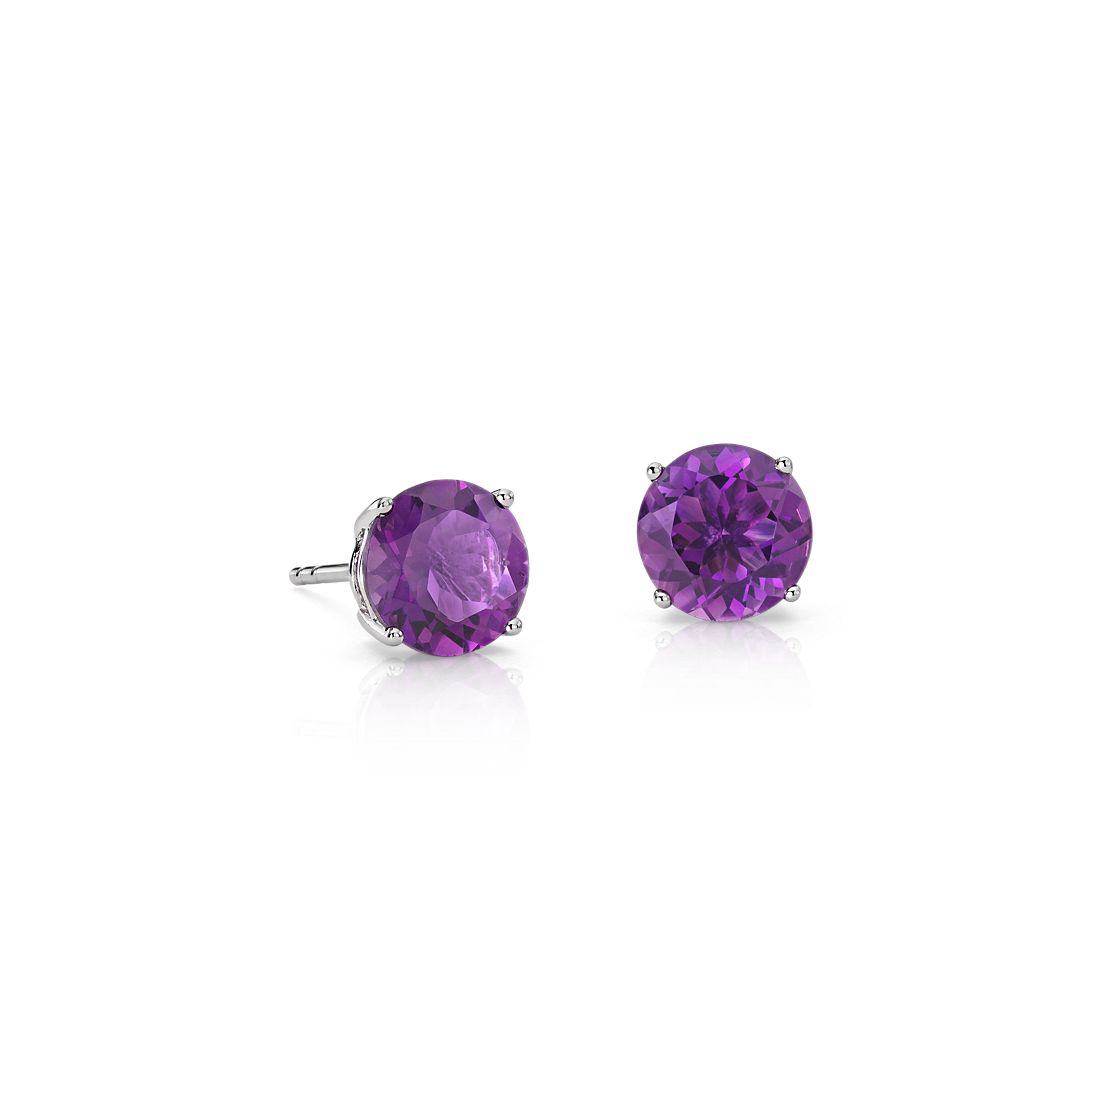 14K White Gold 7MM Round Amethyst and Diamond Earrings